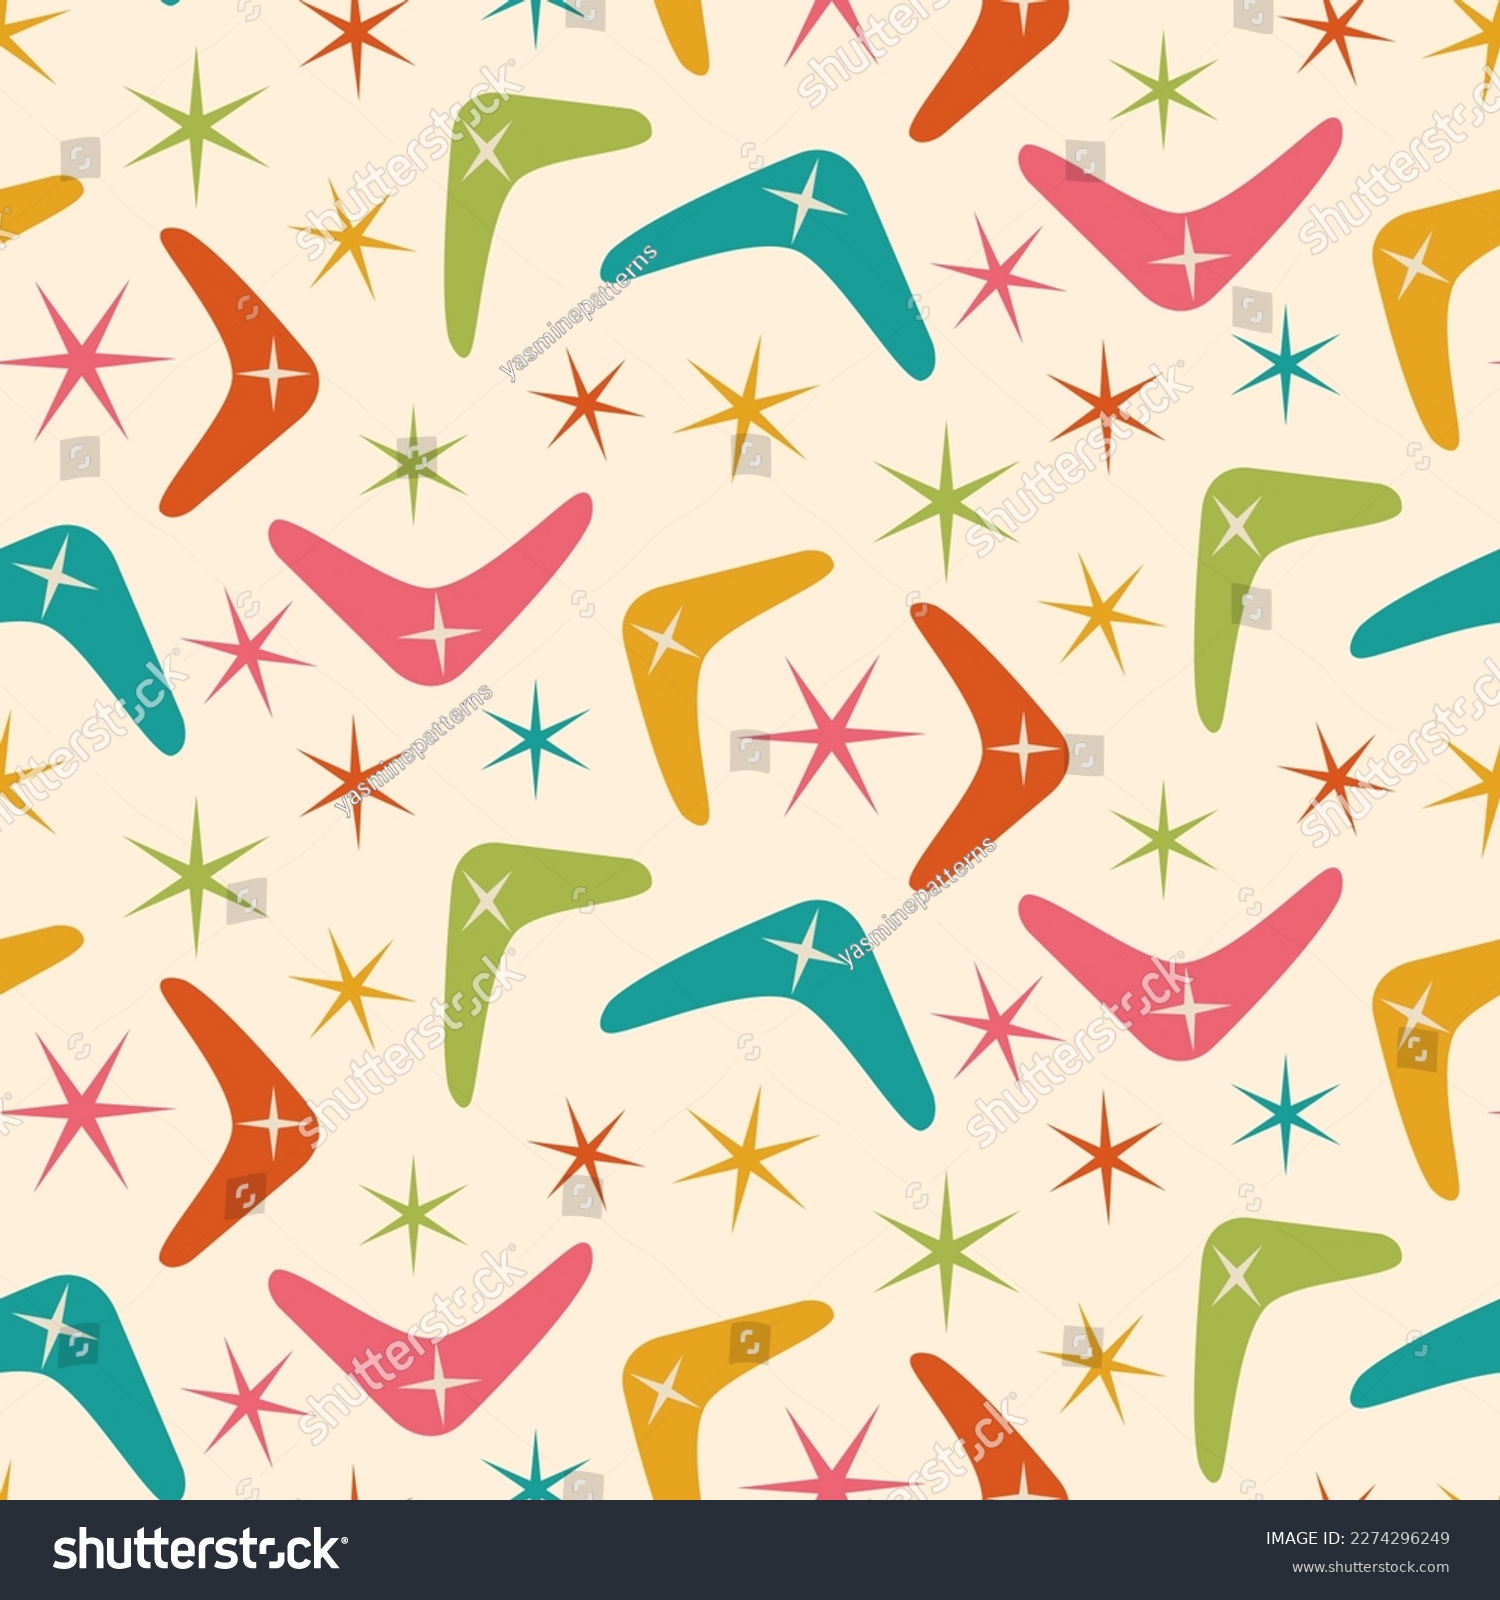 SVG of Mid Century Modern Boomerang seamless pattern with atomic retro stars in orange, teal, green, pink and yellow. For home decor, textile, wallpaper and fabric. svg